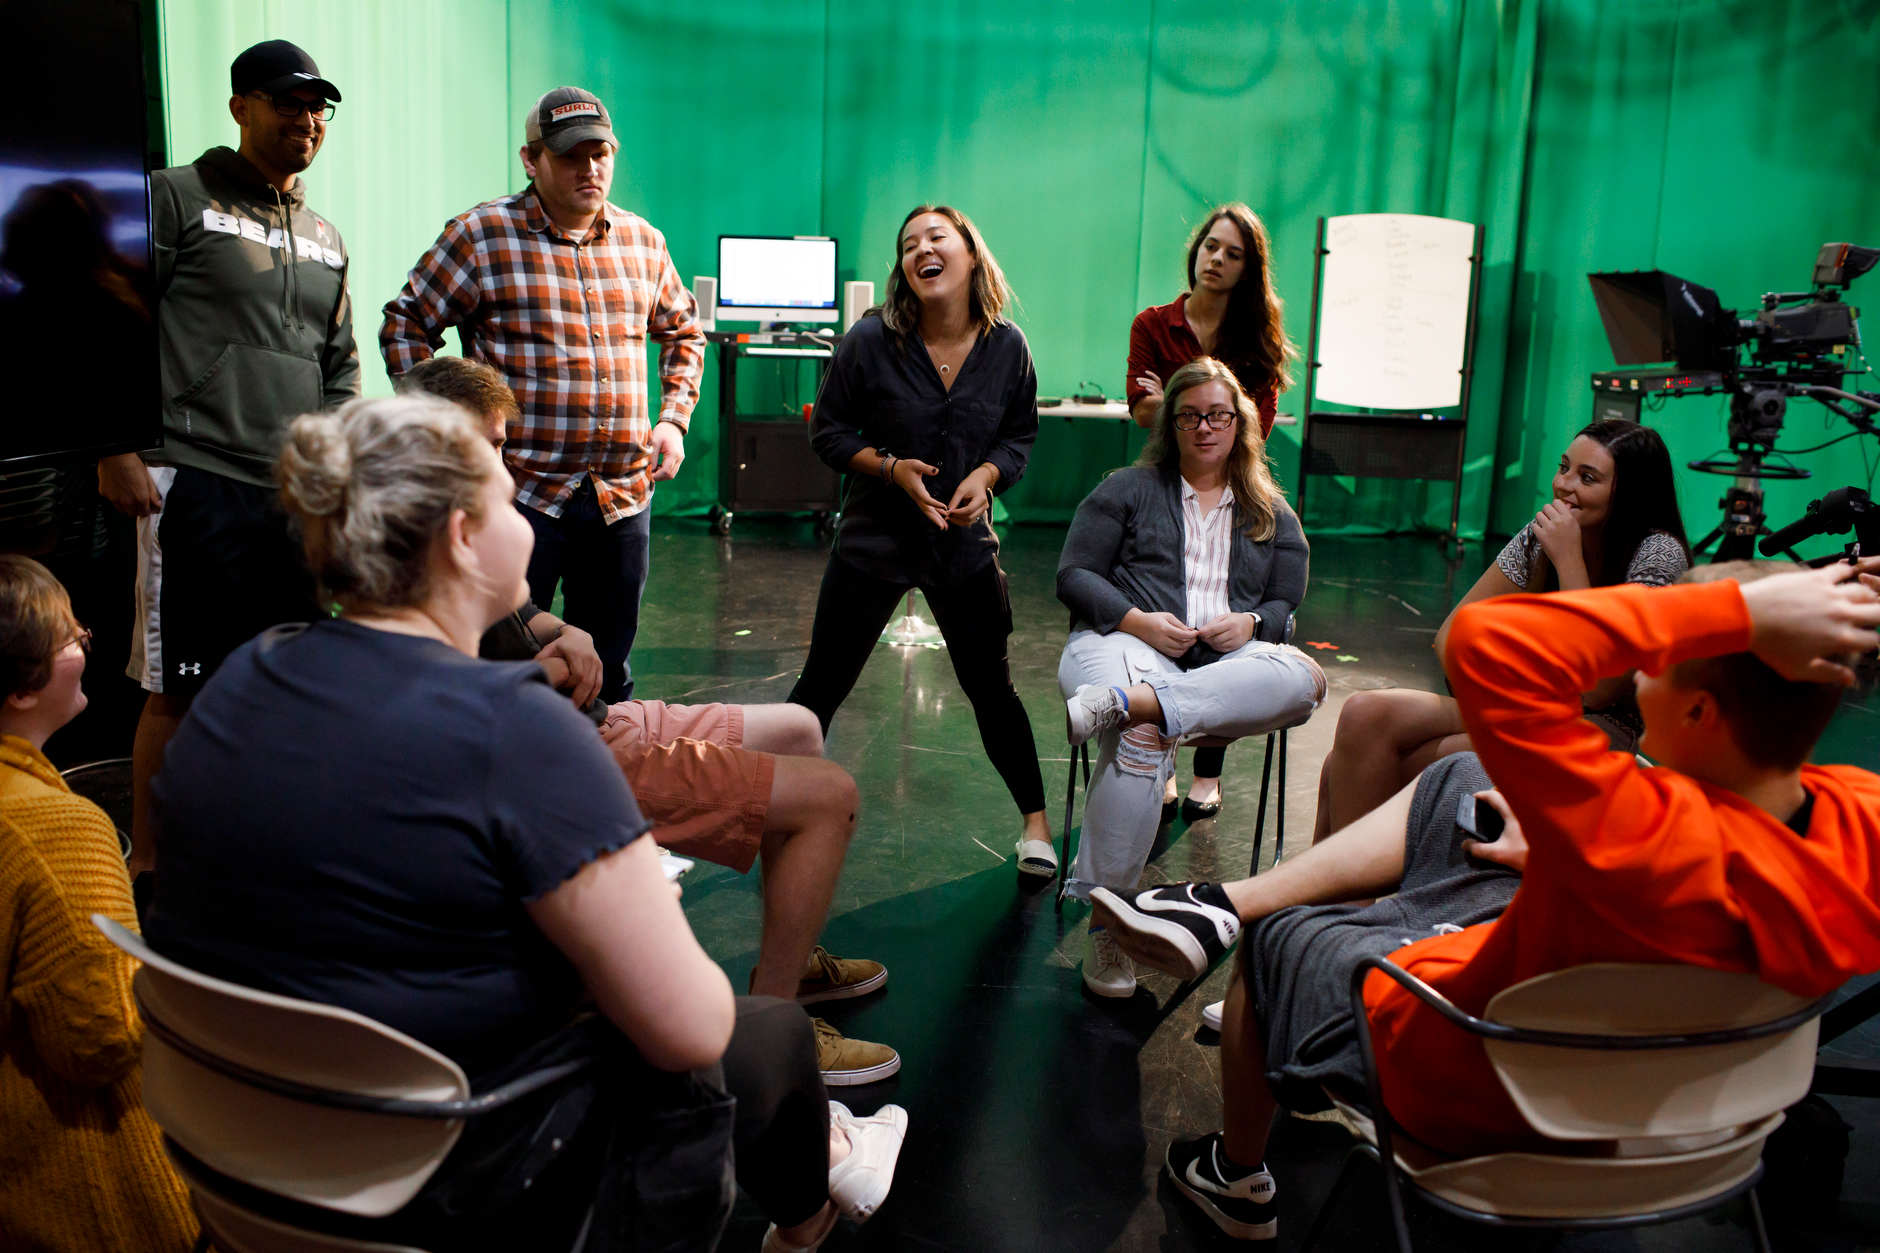 TV Studio Production class at the The Media School at Indiana University in the Radio and TV Building on Monday, Oct. 1, 2018.